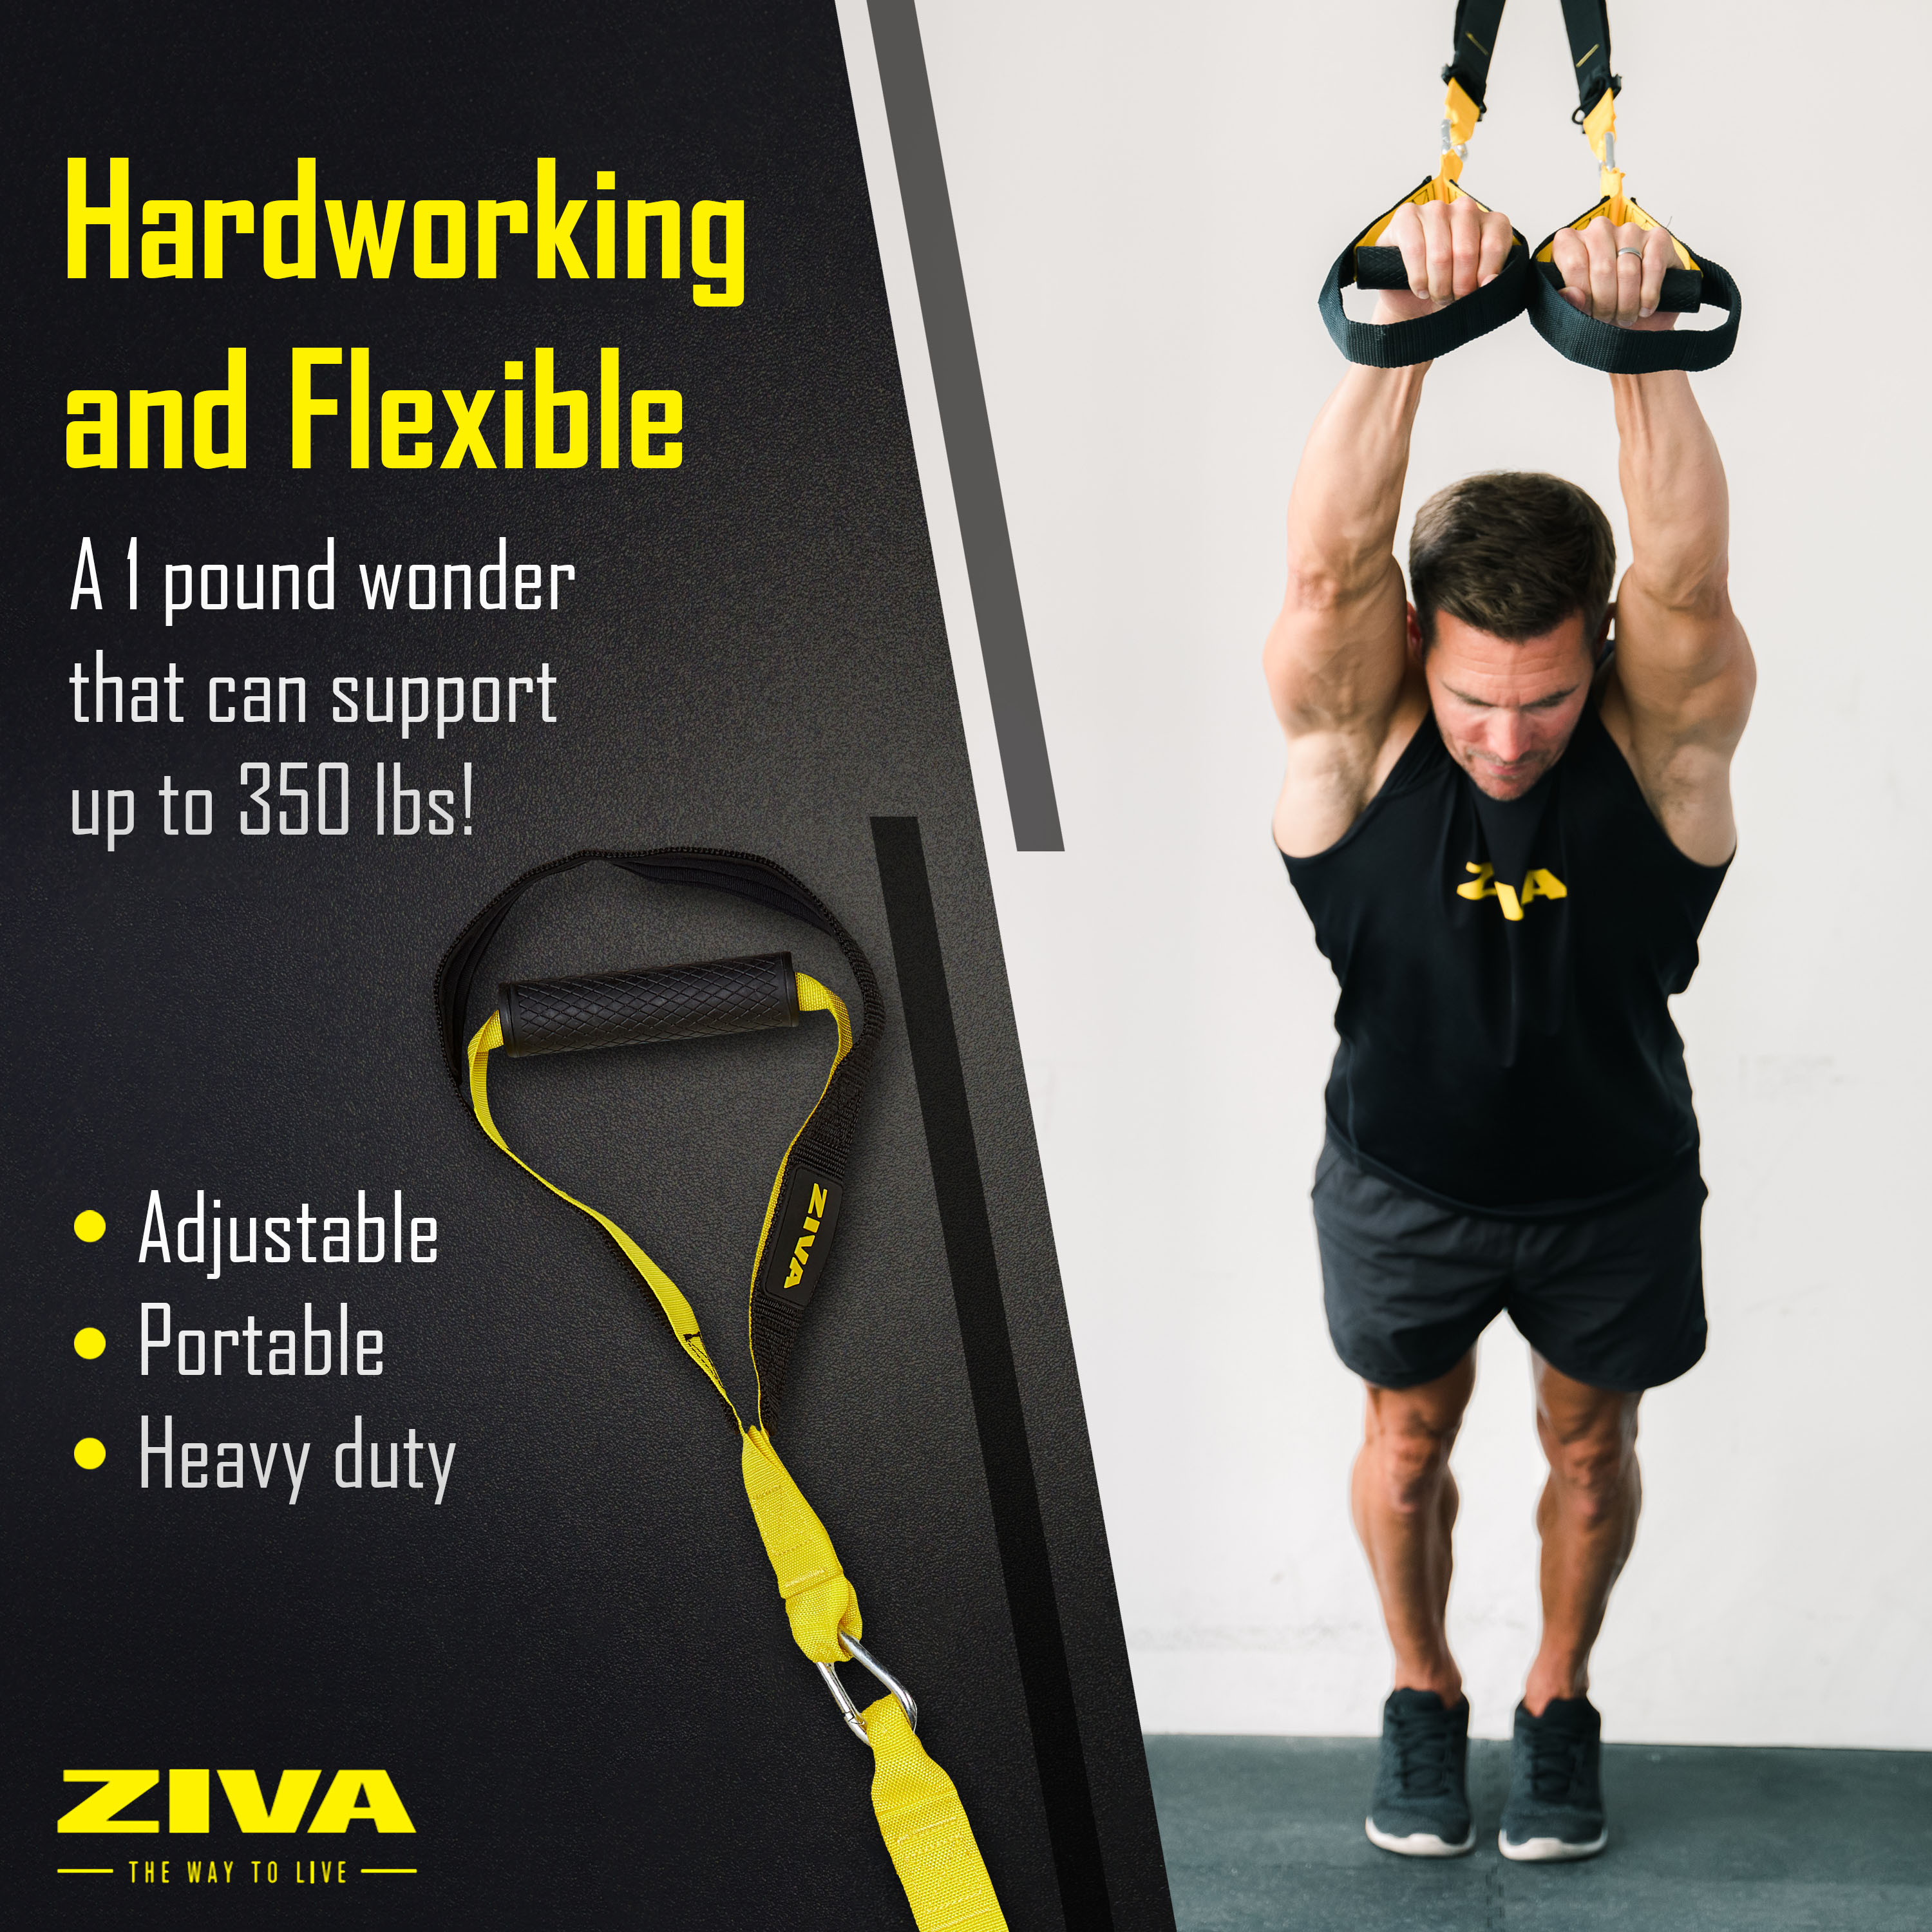 Hardworking and flexible. A 1 pound wonder that can support up to 350 lbs! Adjustable. Portable. Heavy duty.